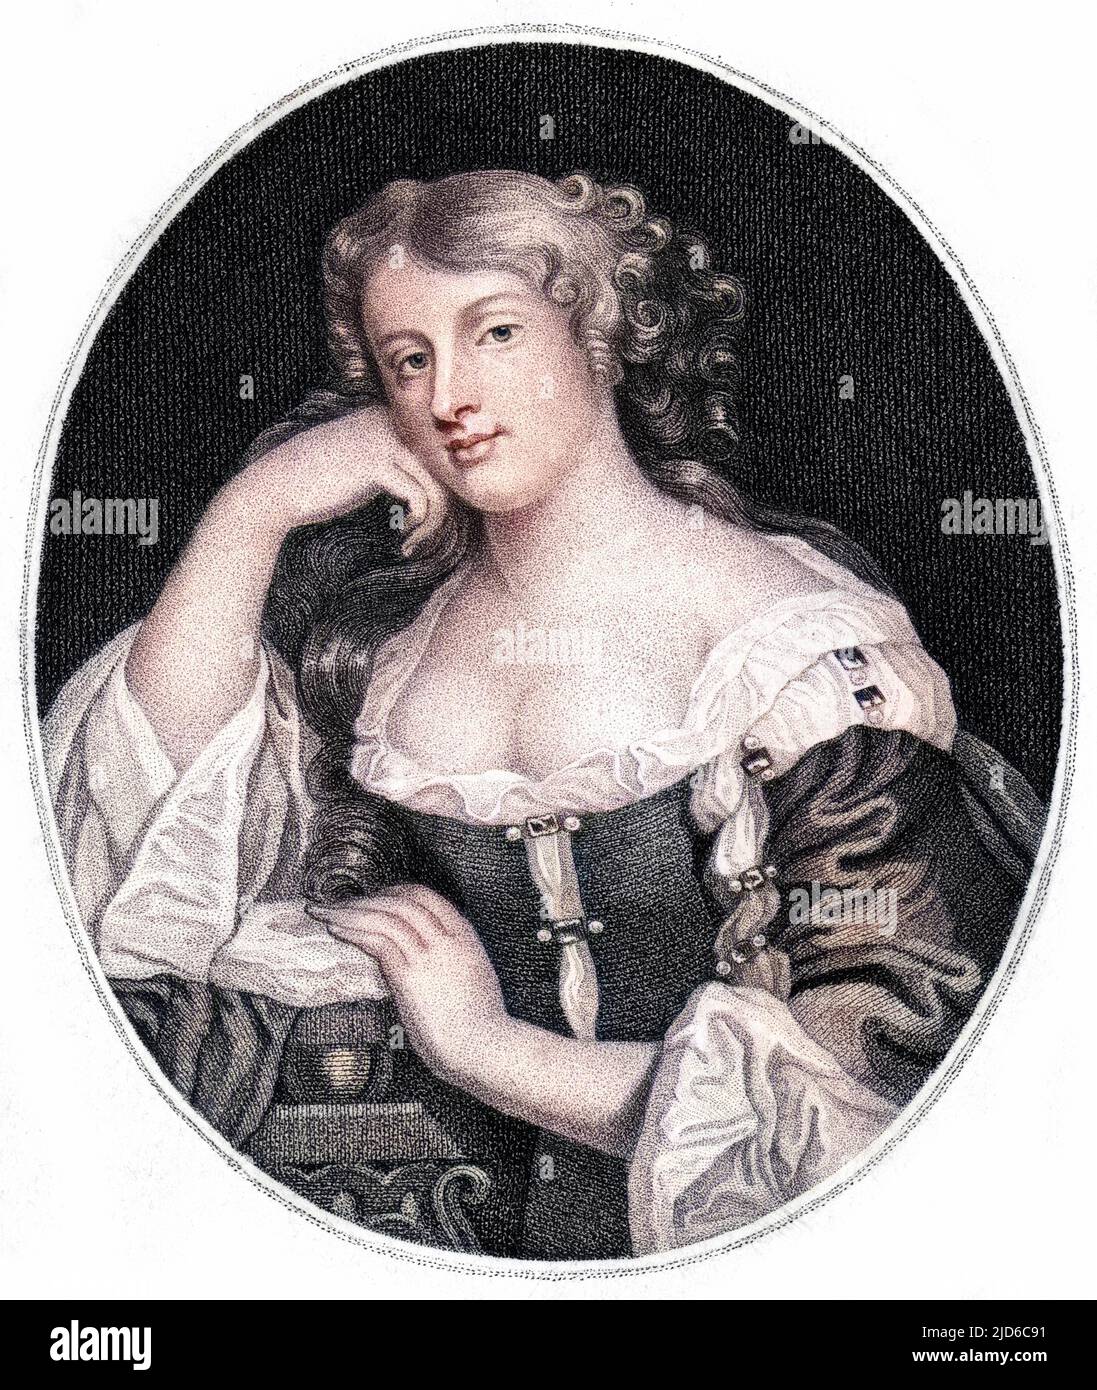 HENRIETTA (nee Hamilton) countess of ORRERY daughter of George earl of Orkney, first wife of John Boyle, fifth earl Colourised version of : 10171592       Date: ? - 1732 Stock Photo